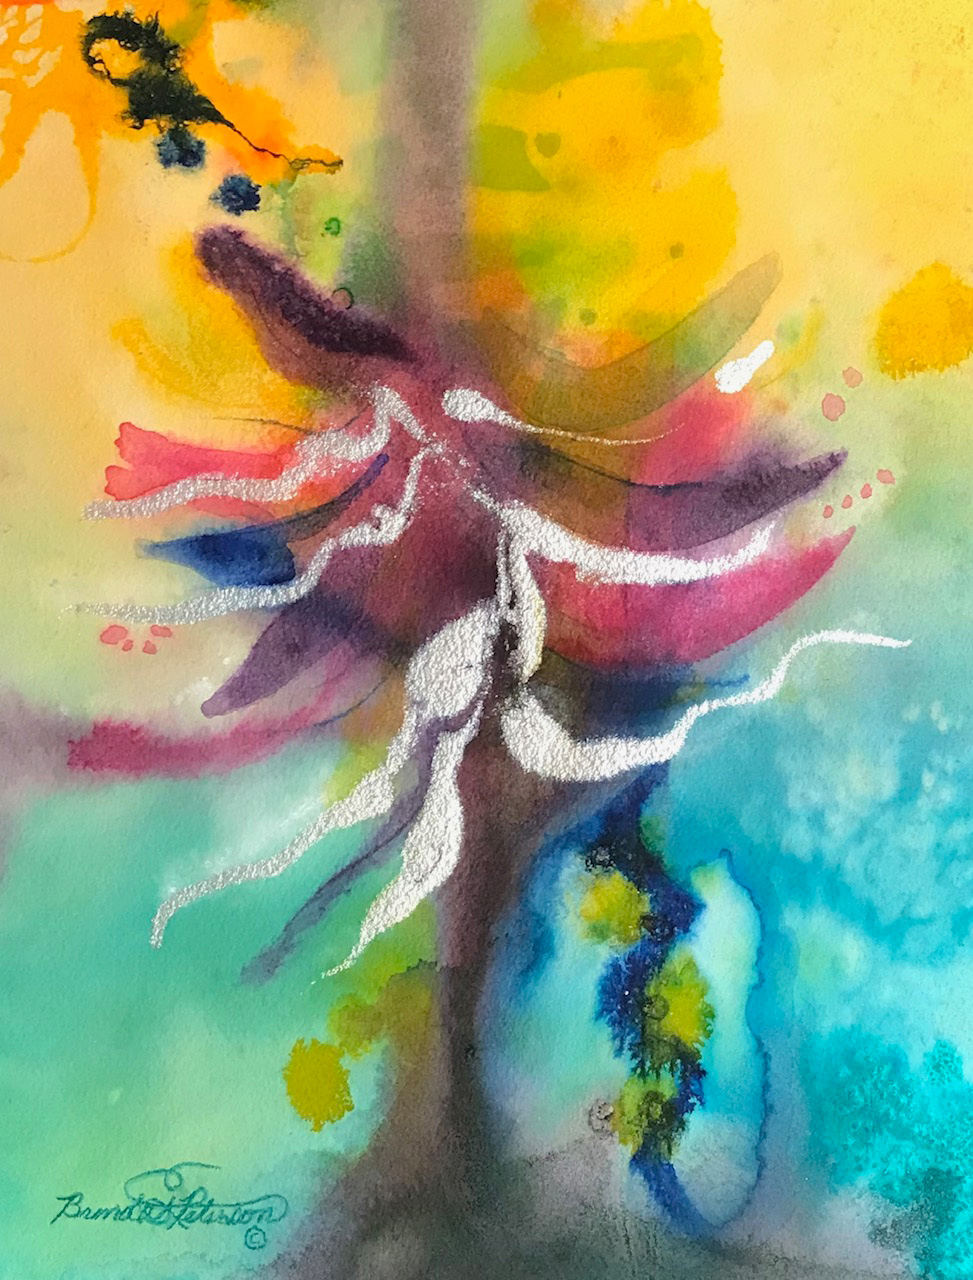 Lilly Sunrising, Fluid watercolor on paper, 12 x 15